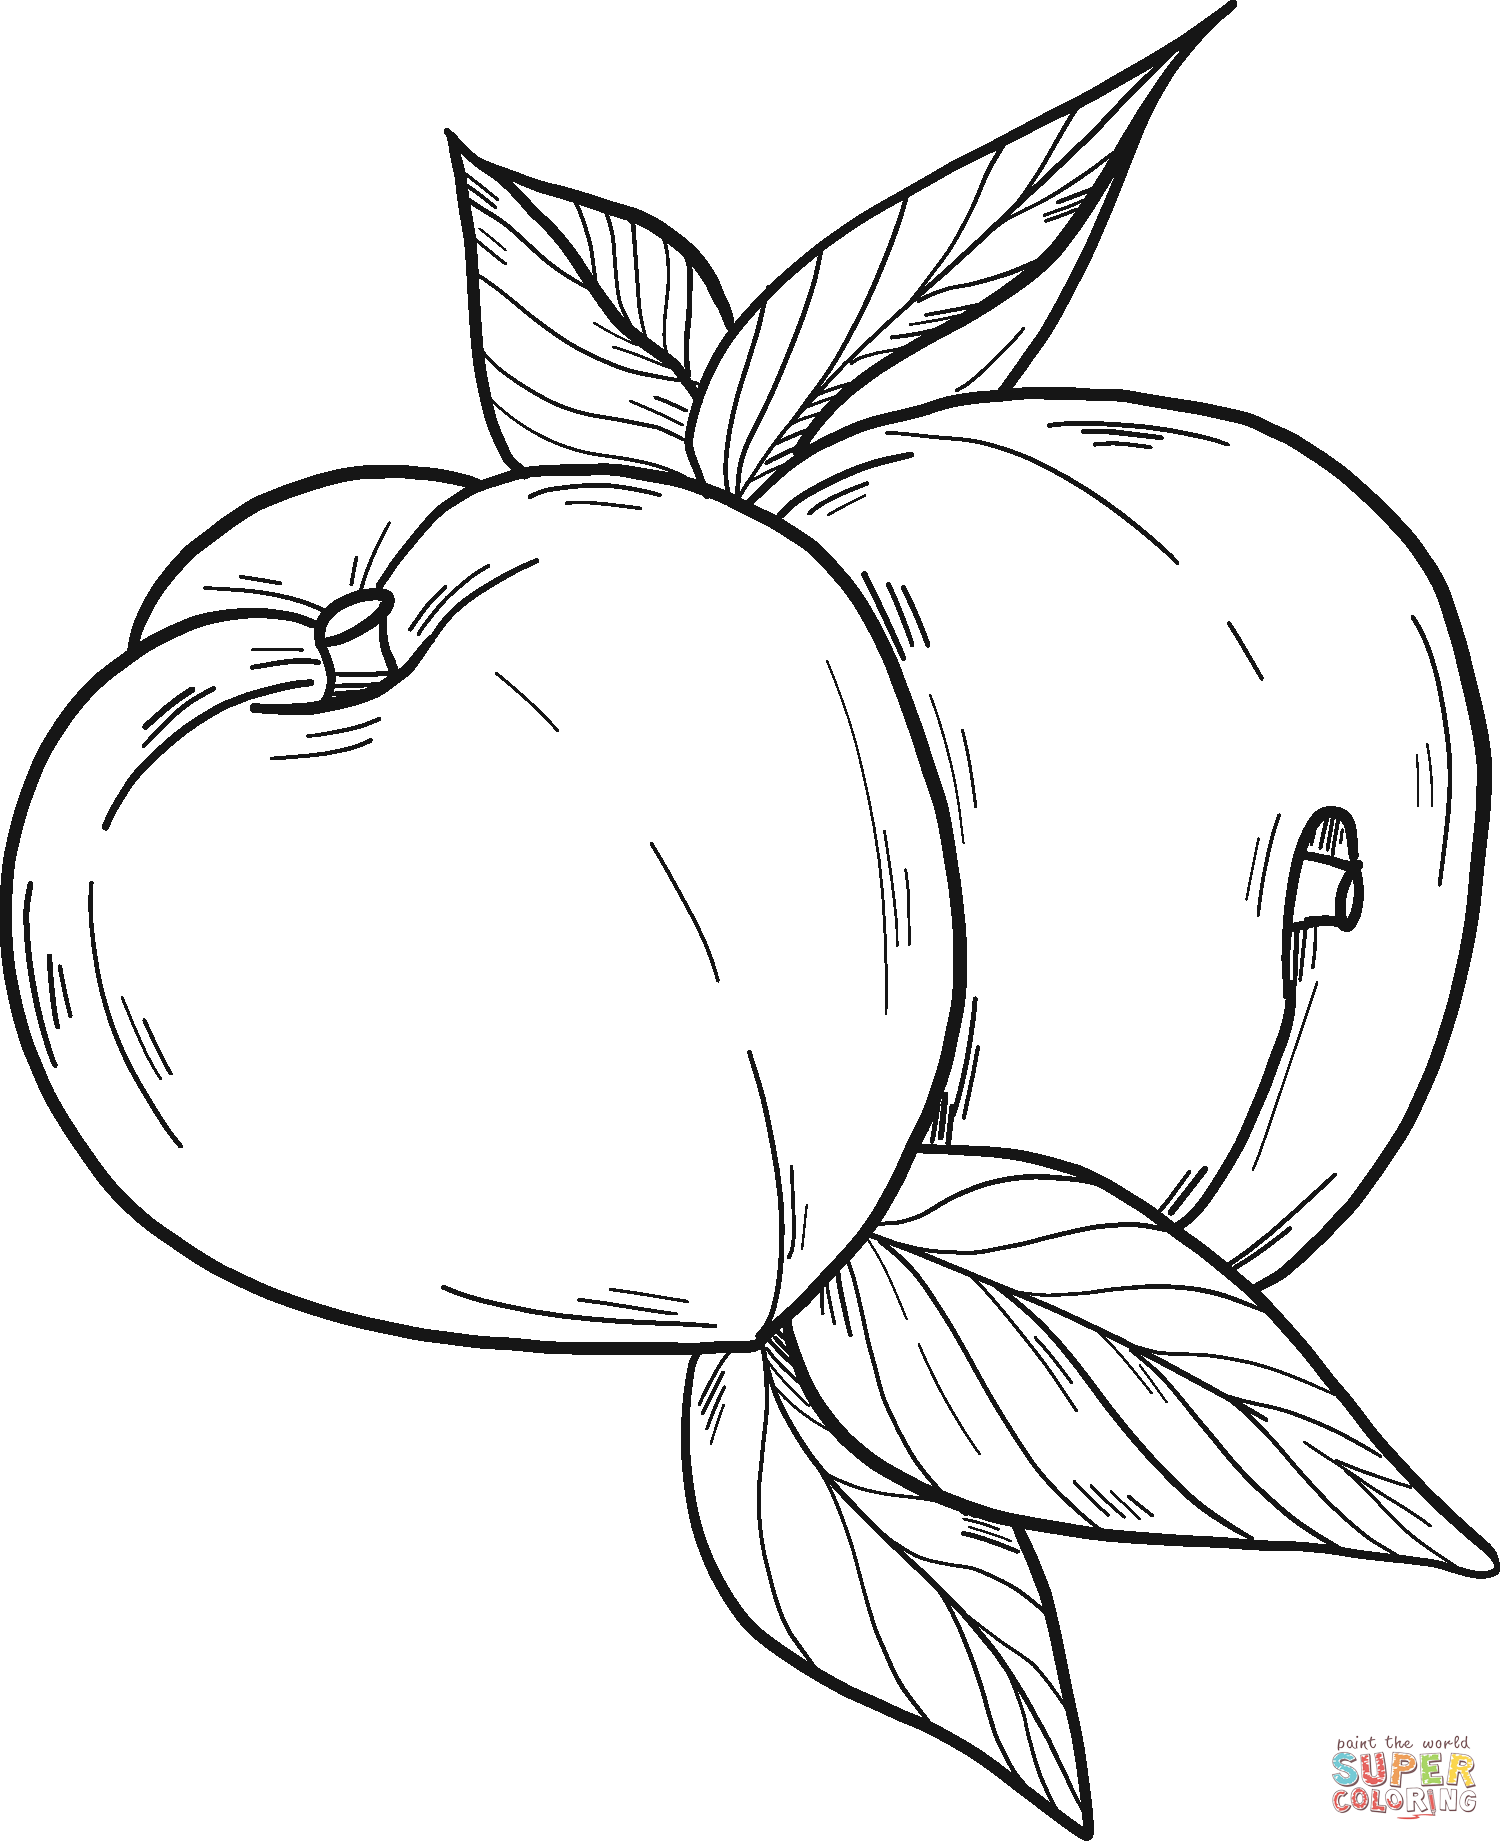 Peaches coloring page | Free Printable Coloring Pages